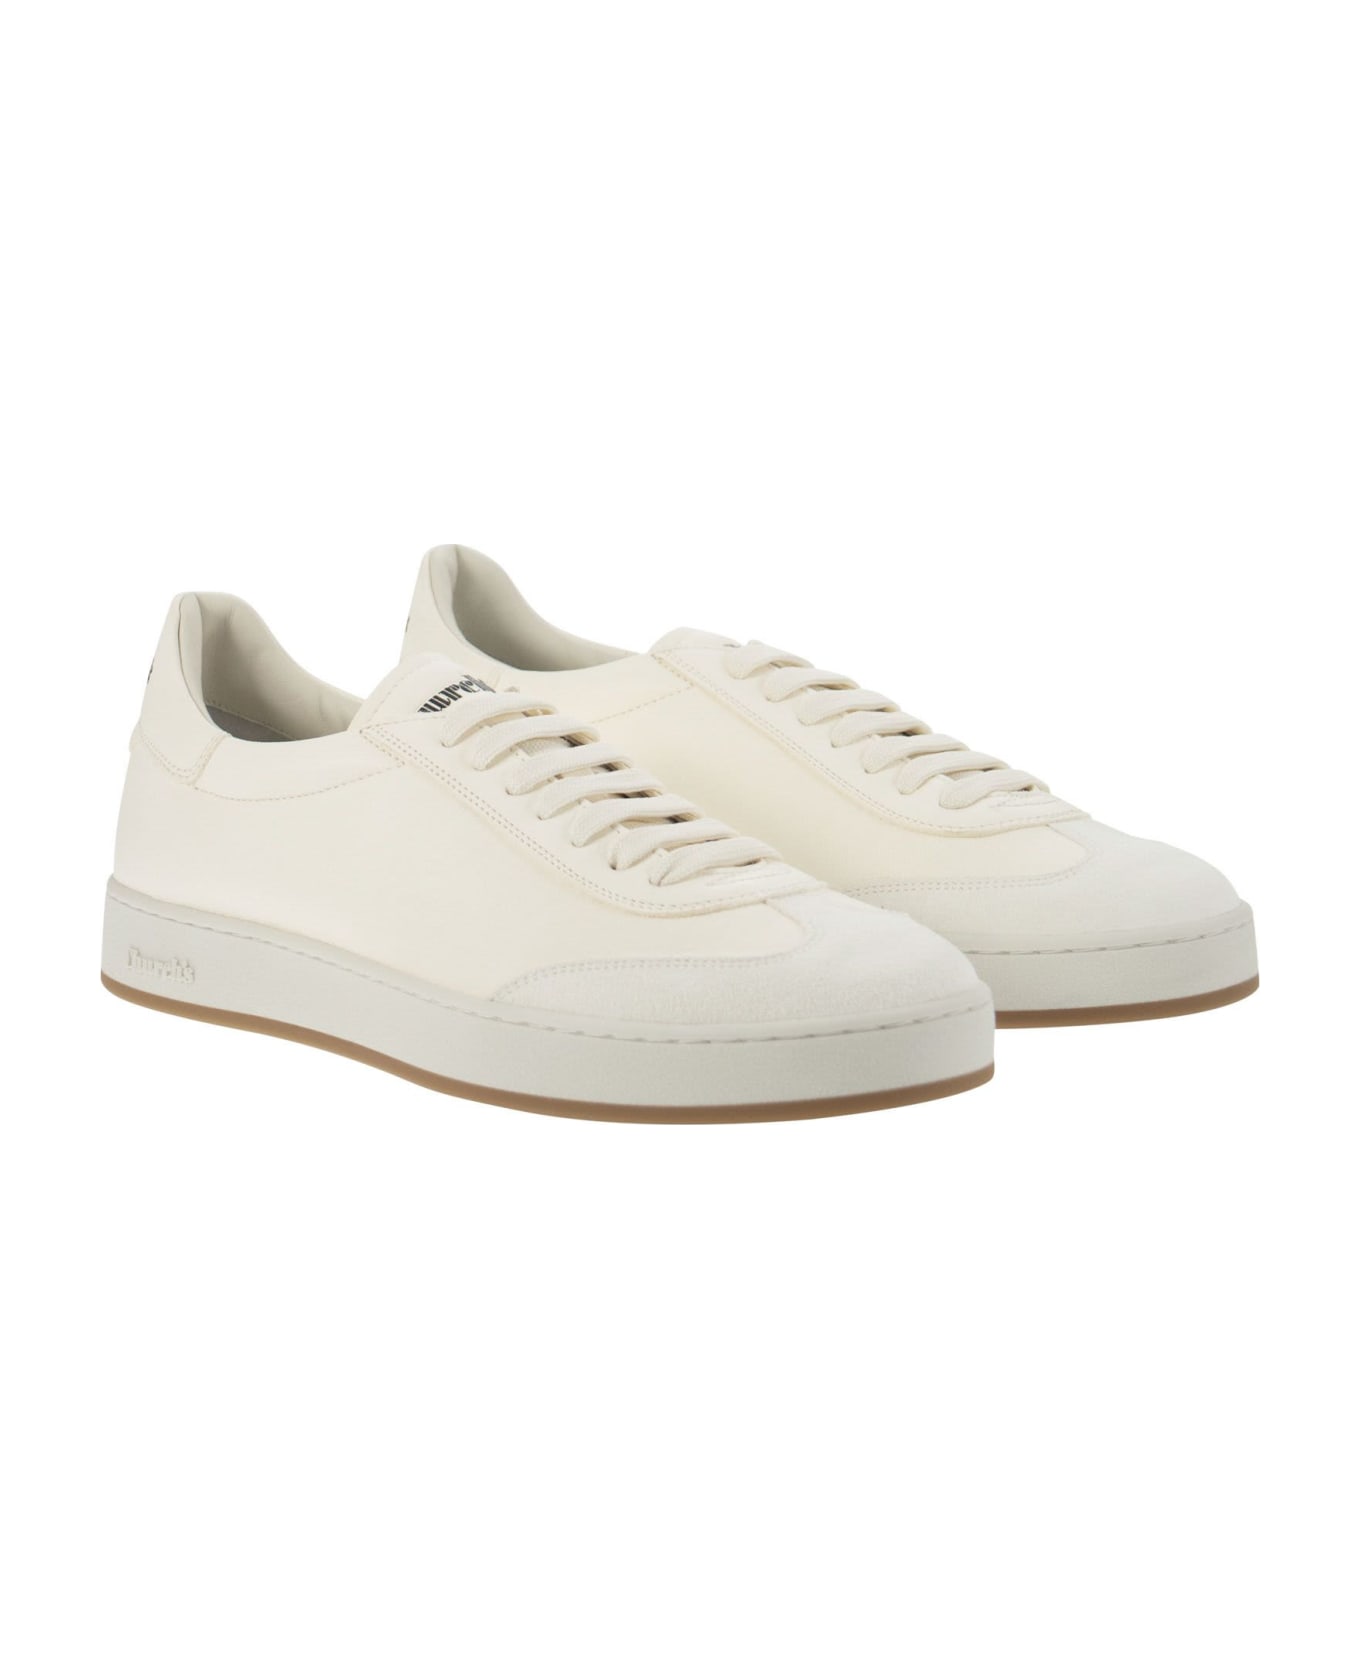 Church's Largs - Suede And Deerskin Sneaker - White